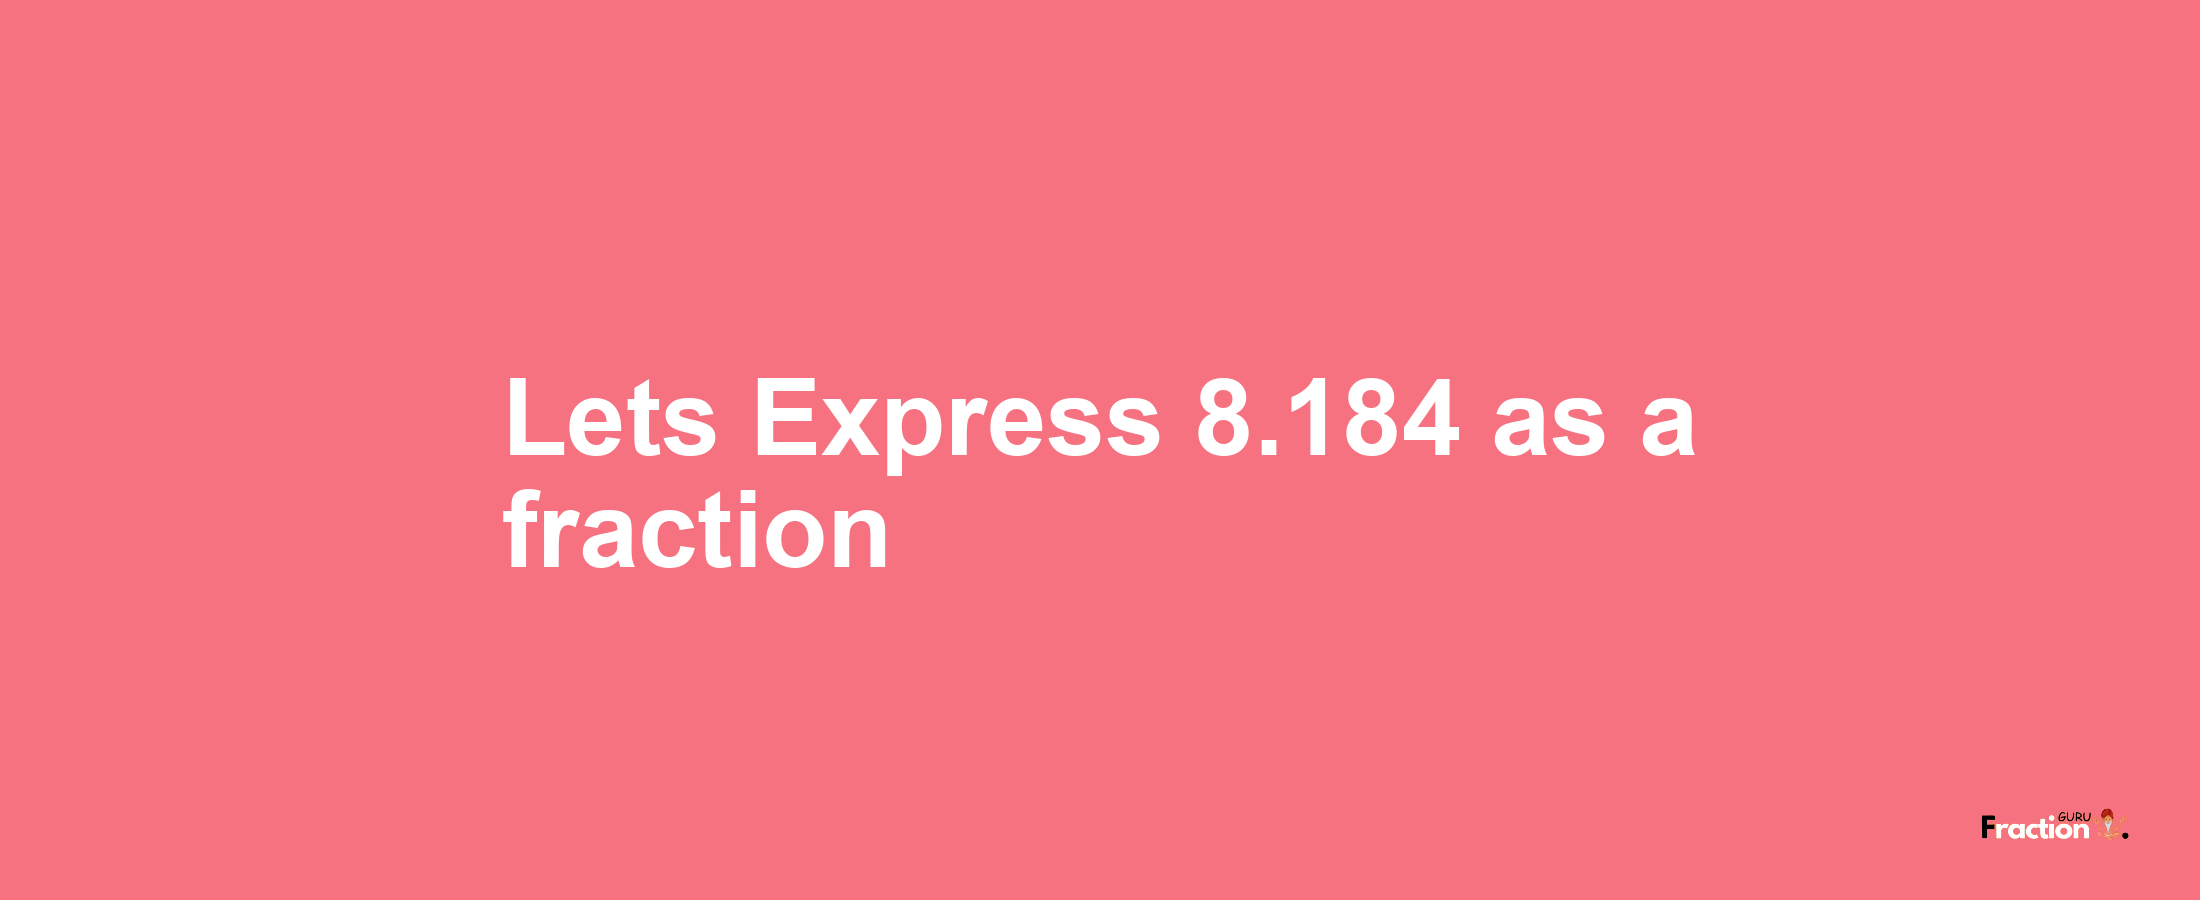 Lets Express 8.184 as afraction